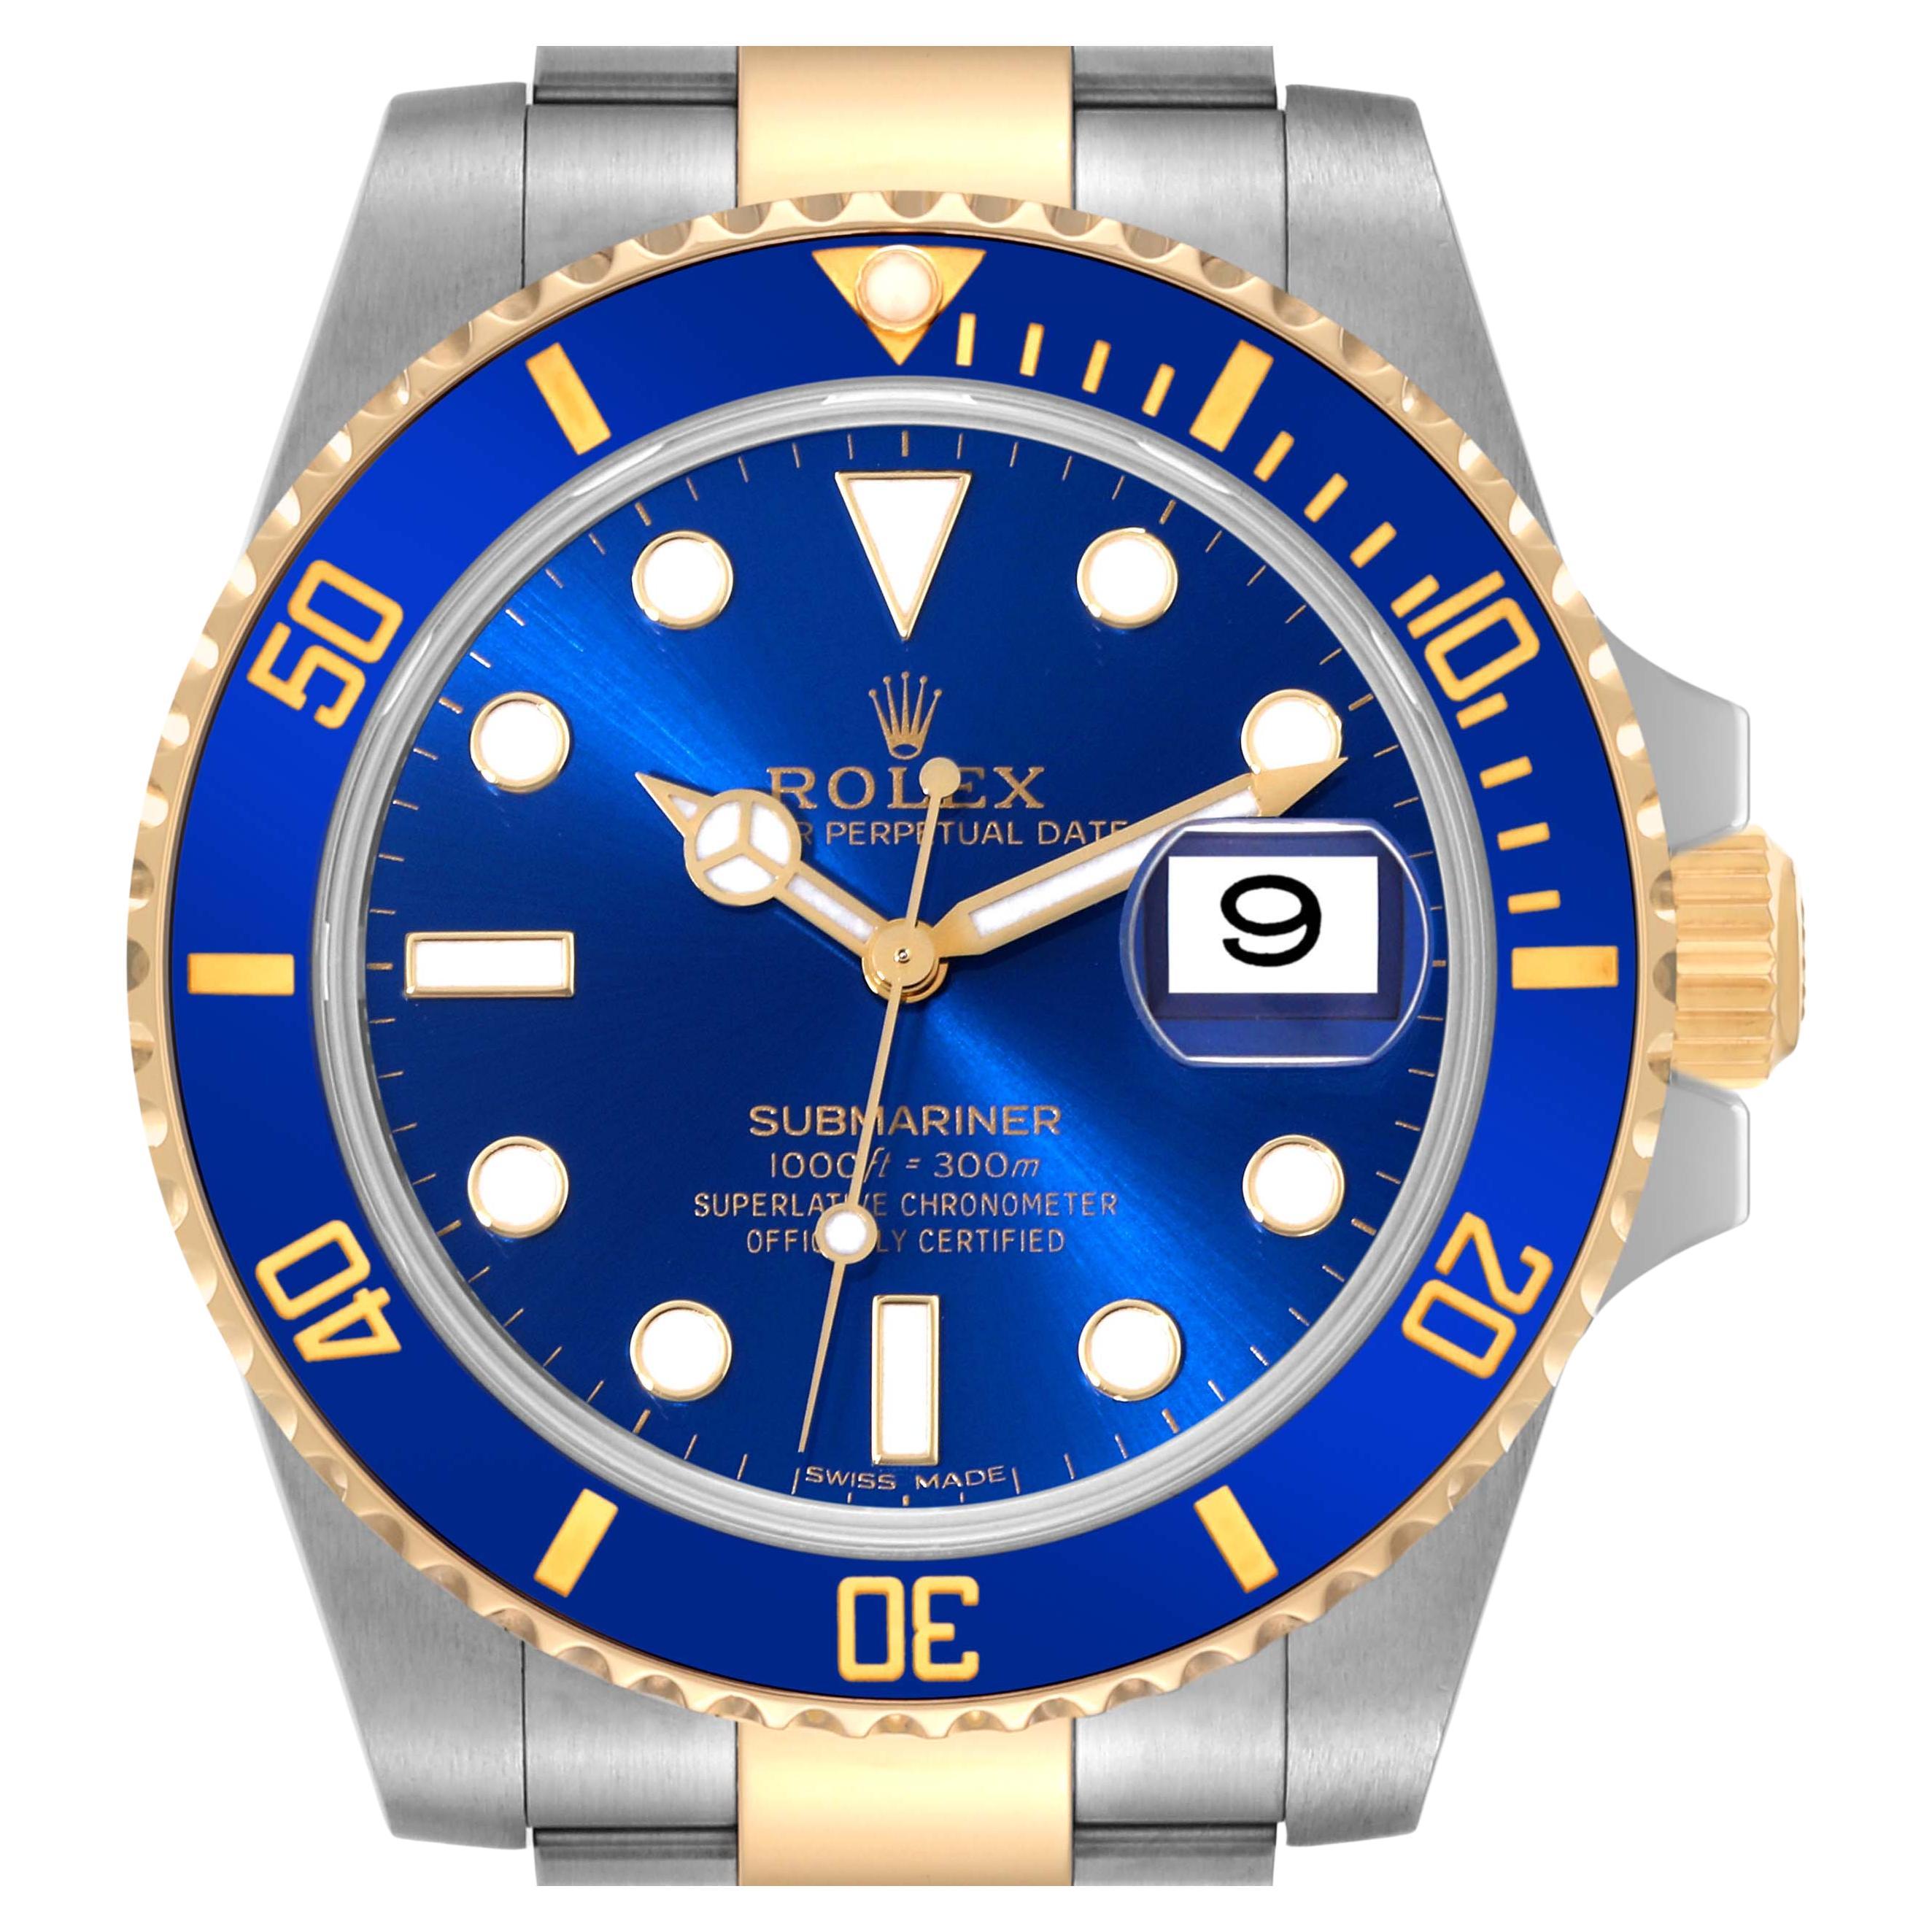 Rolex Submariner Steel Yellow Gold Blue Dial Mens Watch 116613 Box Card